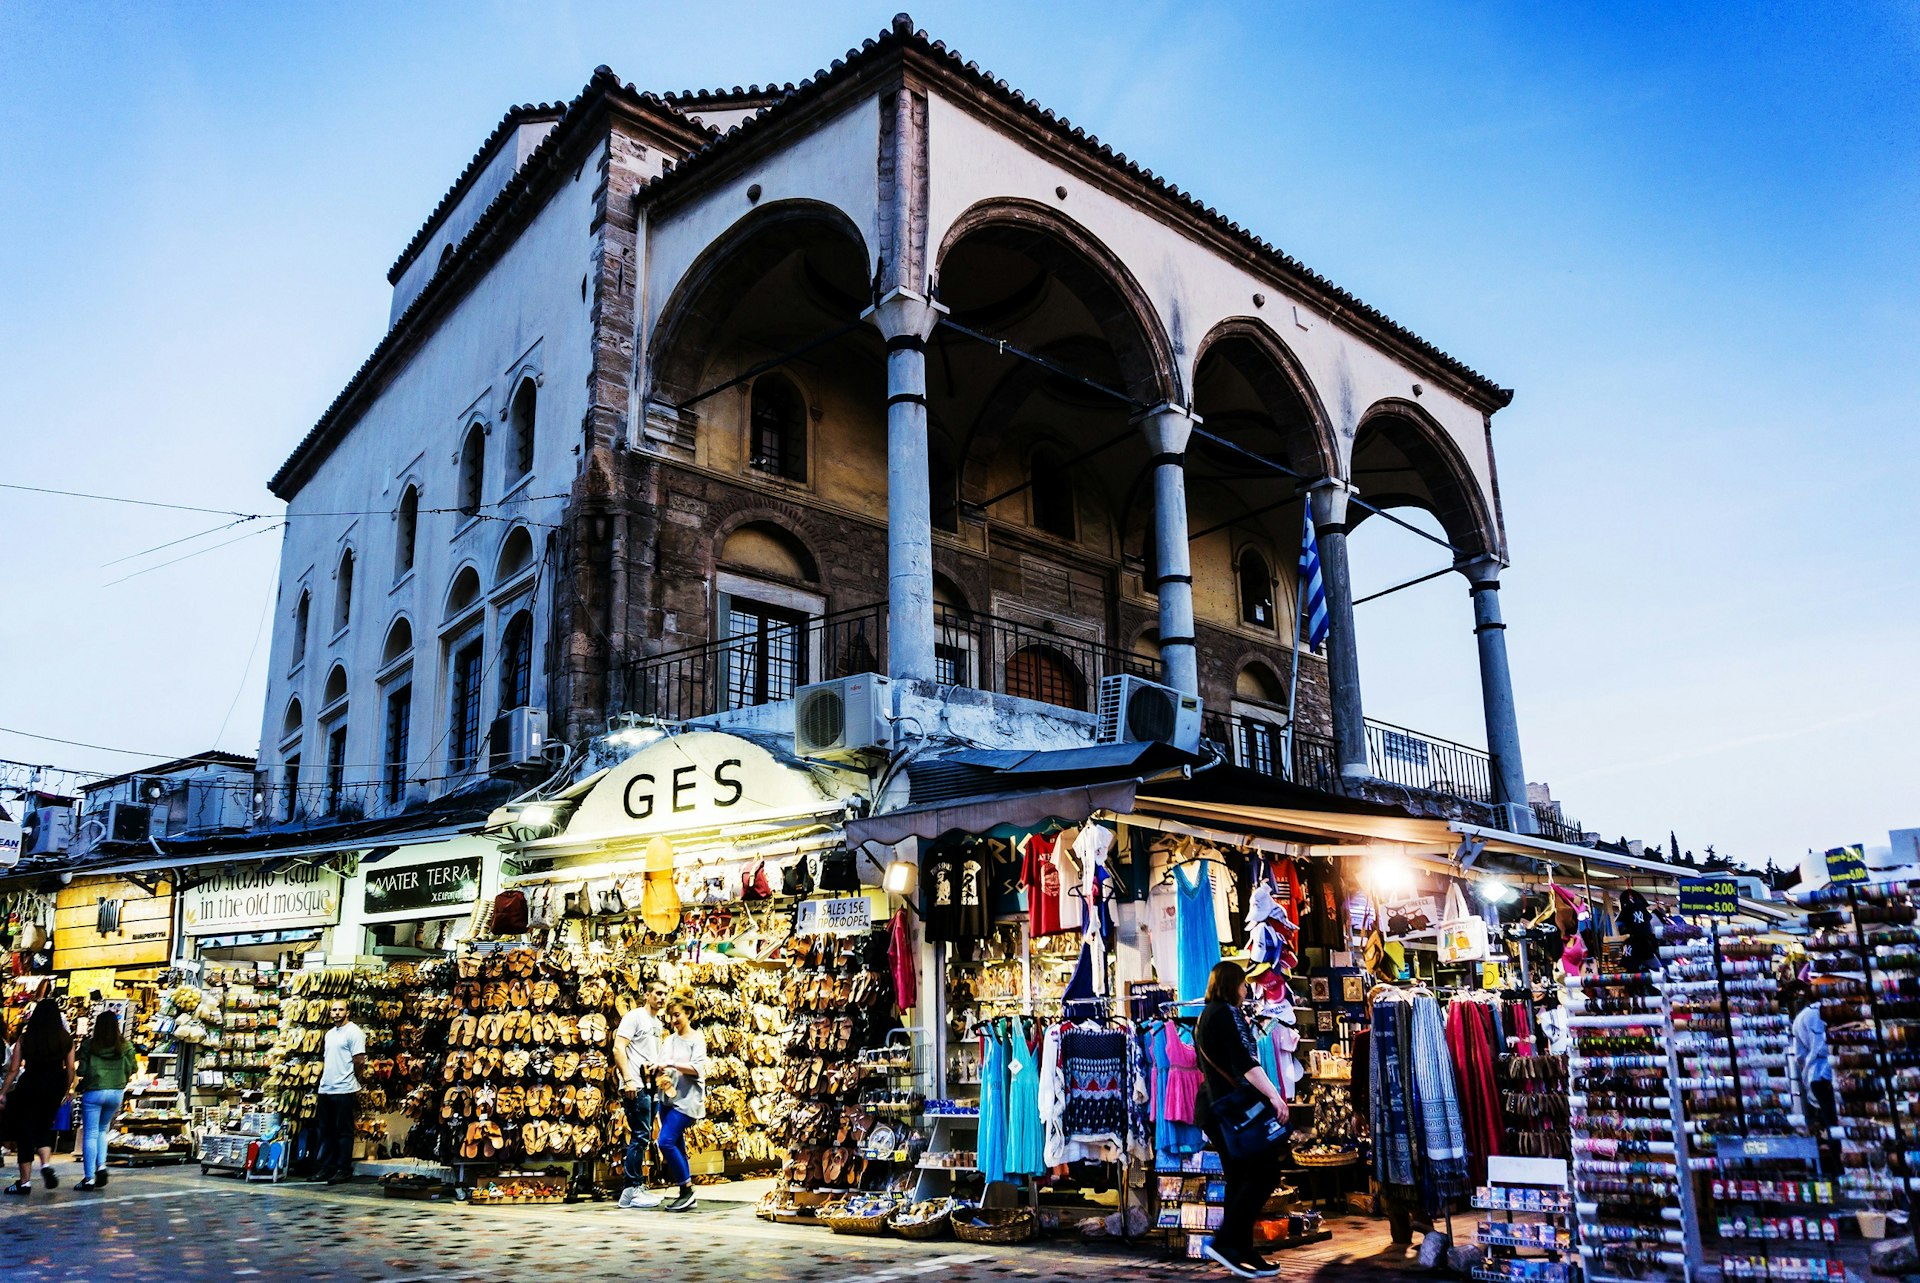 A large building, with four columns supporting its roof, is surrounded by stalls selling clothes, shoes and souvenirs